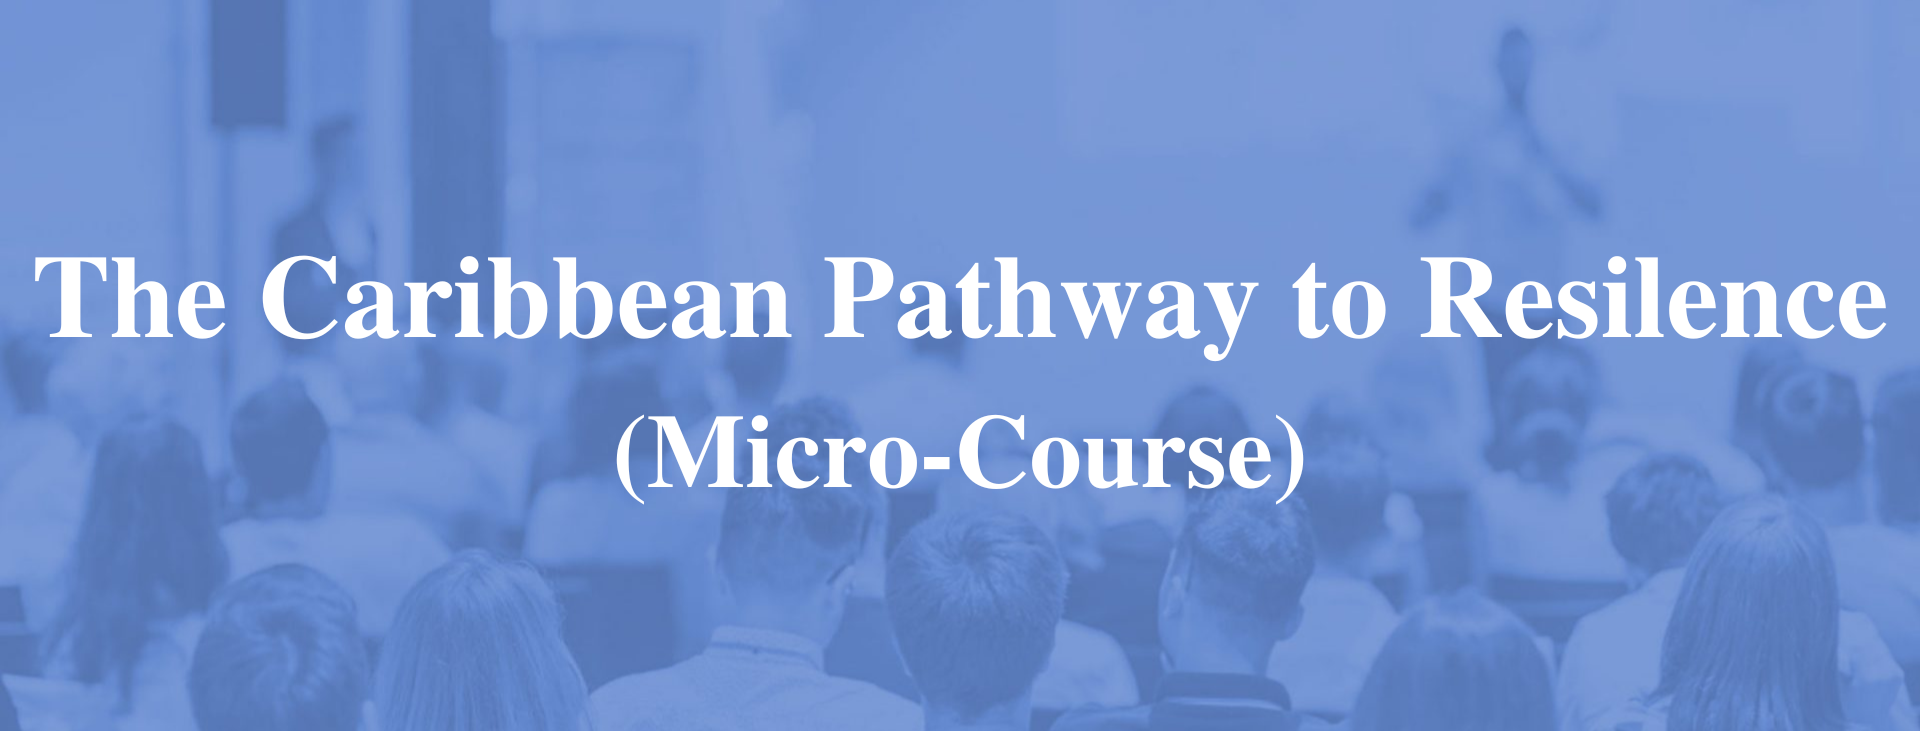 The Caribbean Pathway to Resilience (Micro-course)